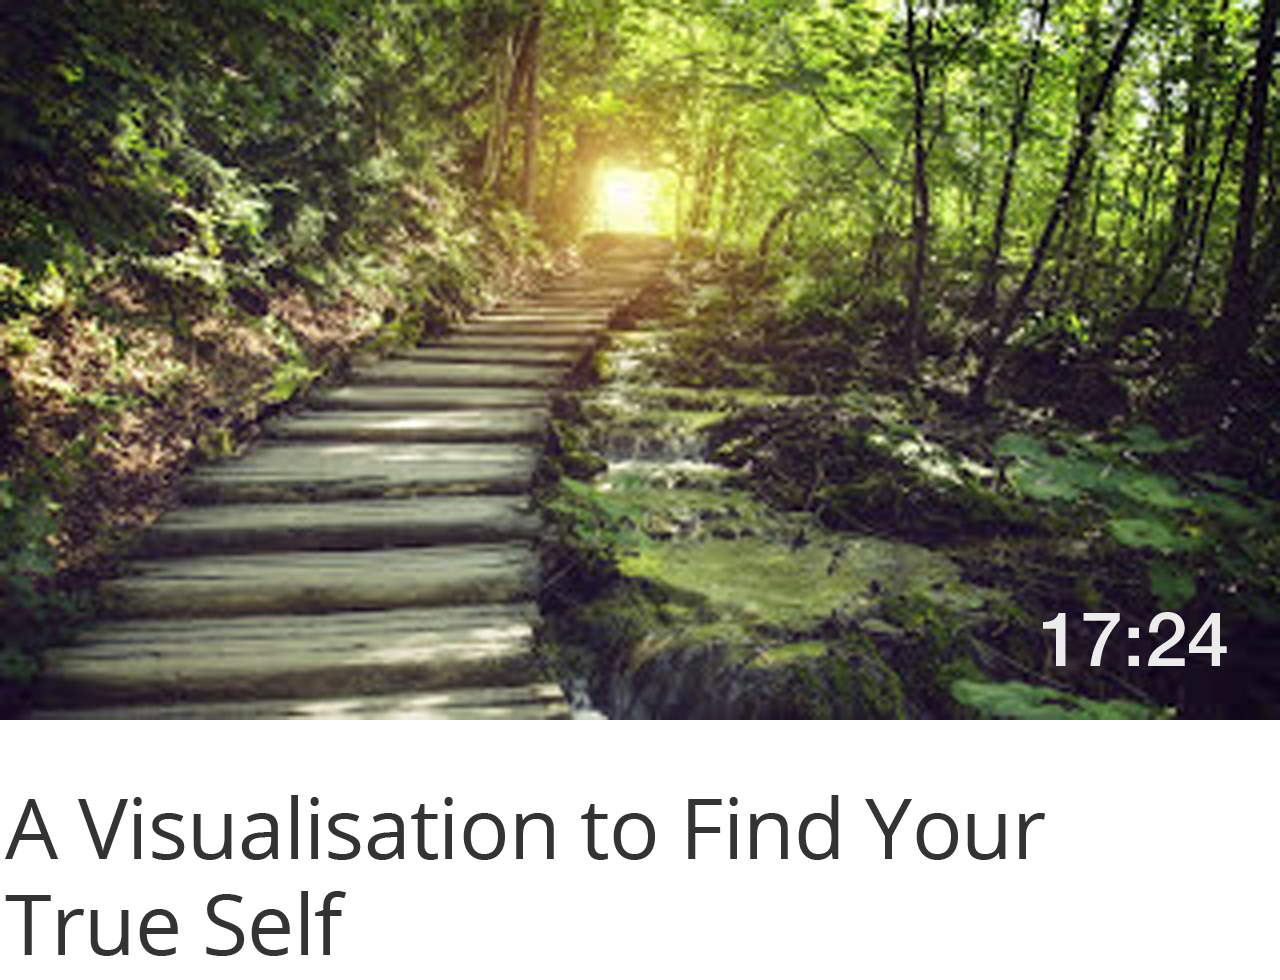 A Visualisation to Find Your True Self